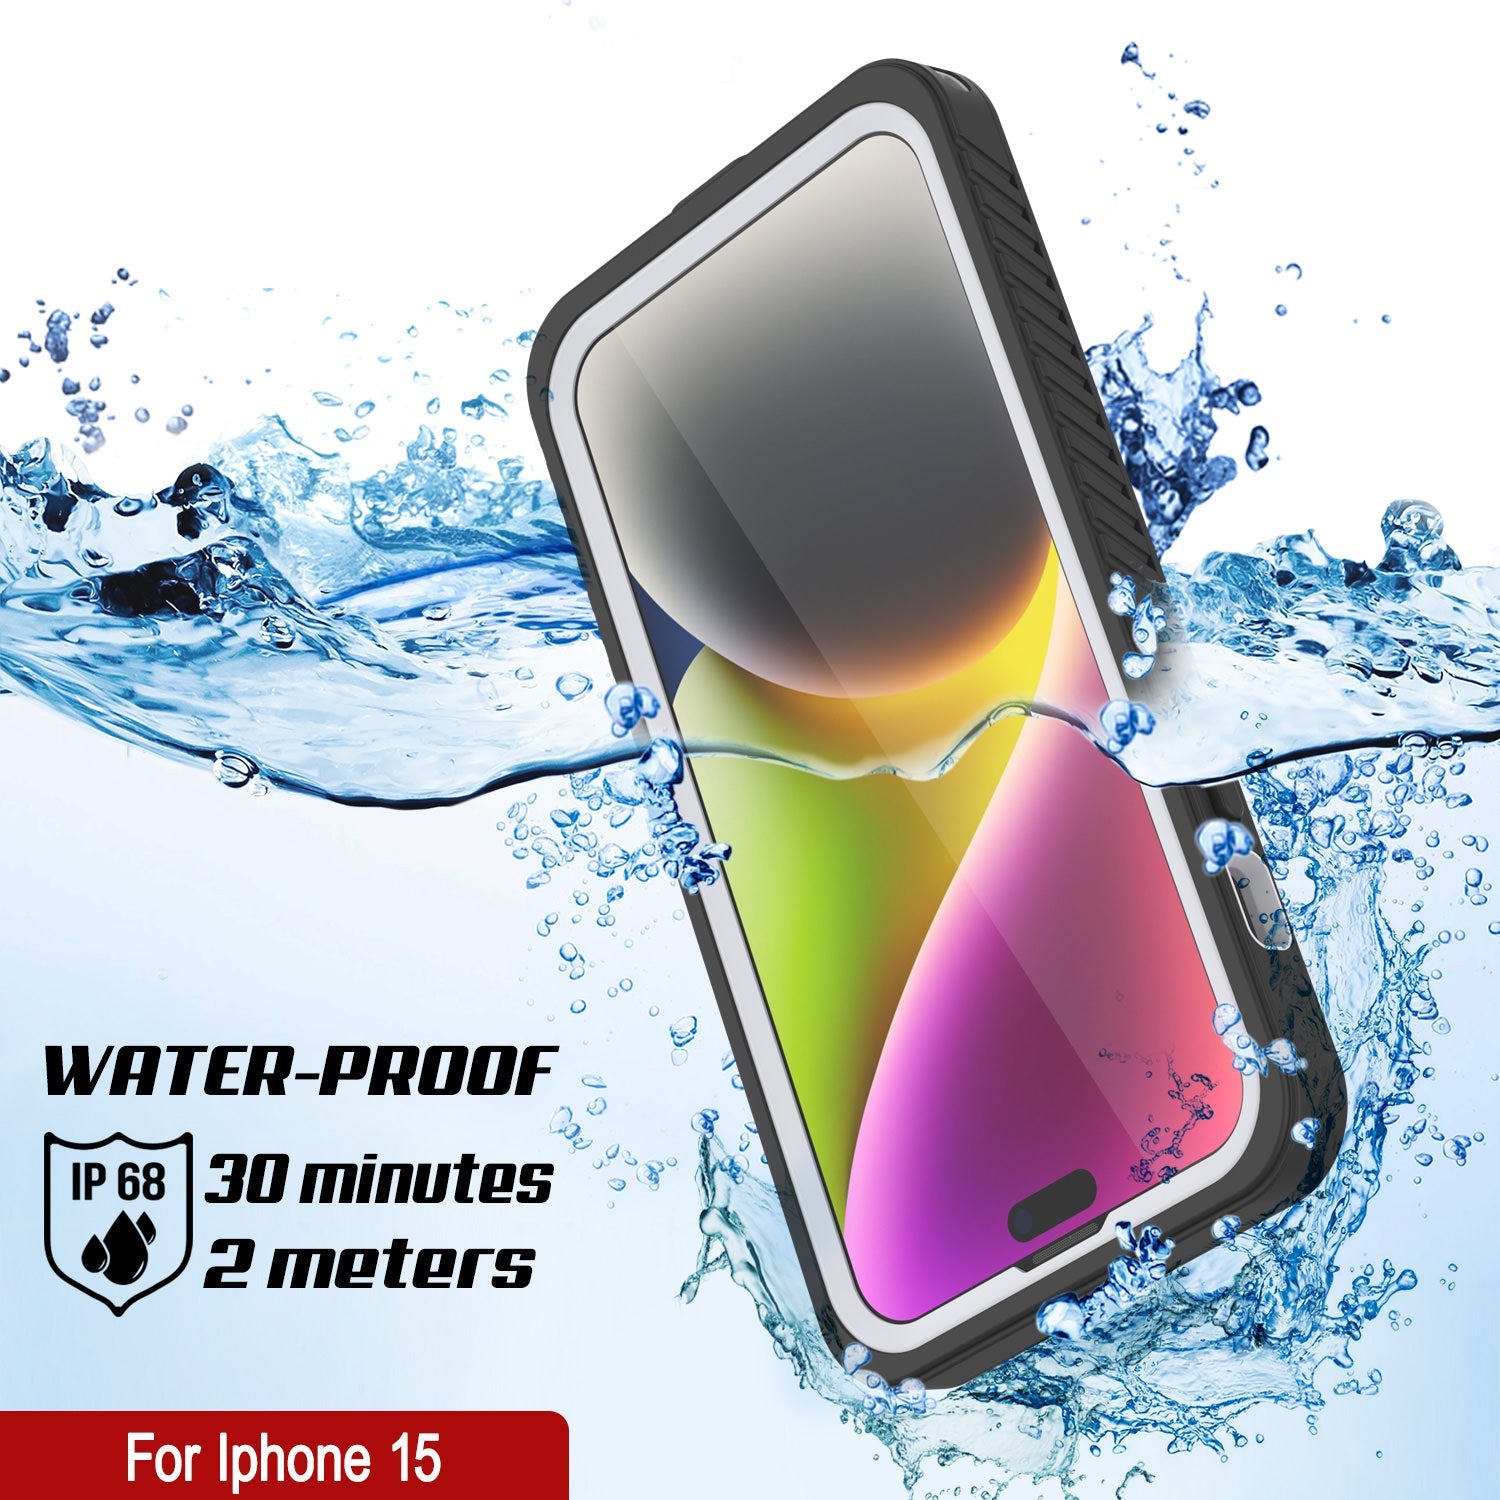 iPhone 15 Waterproof Case, Punkcase [Extreme Series] Armor Cover W/ Built In Screen Protector [White]